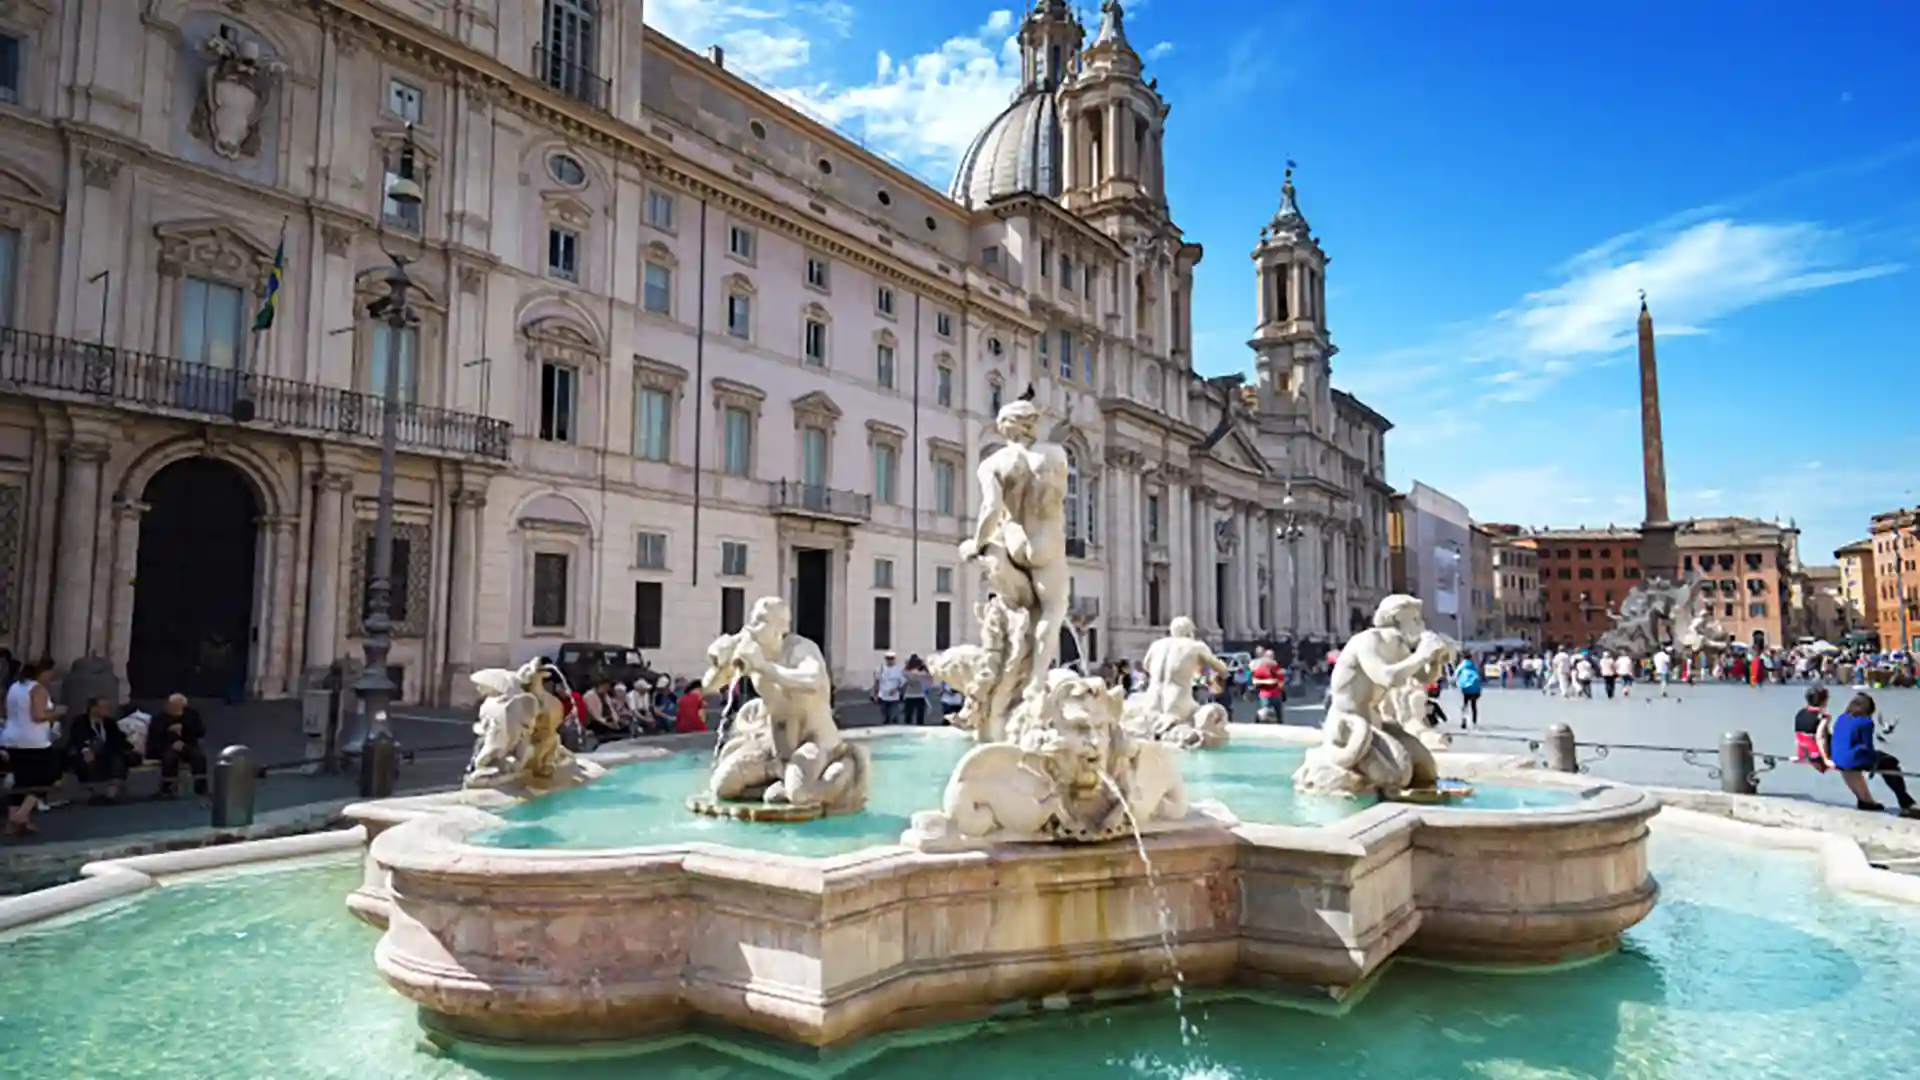 View of piazza and fountain in Rome.